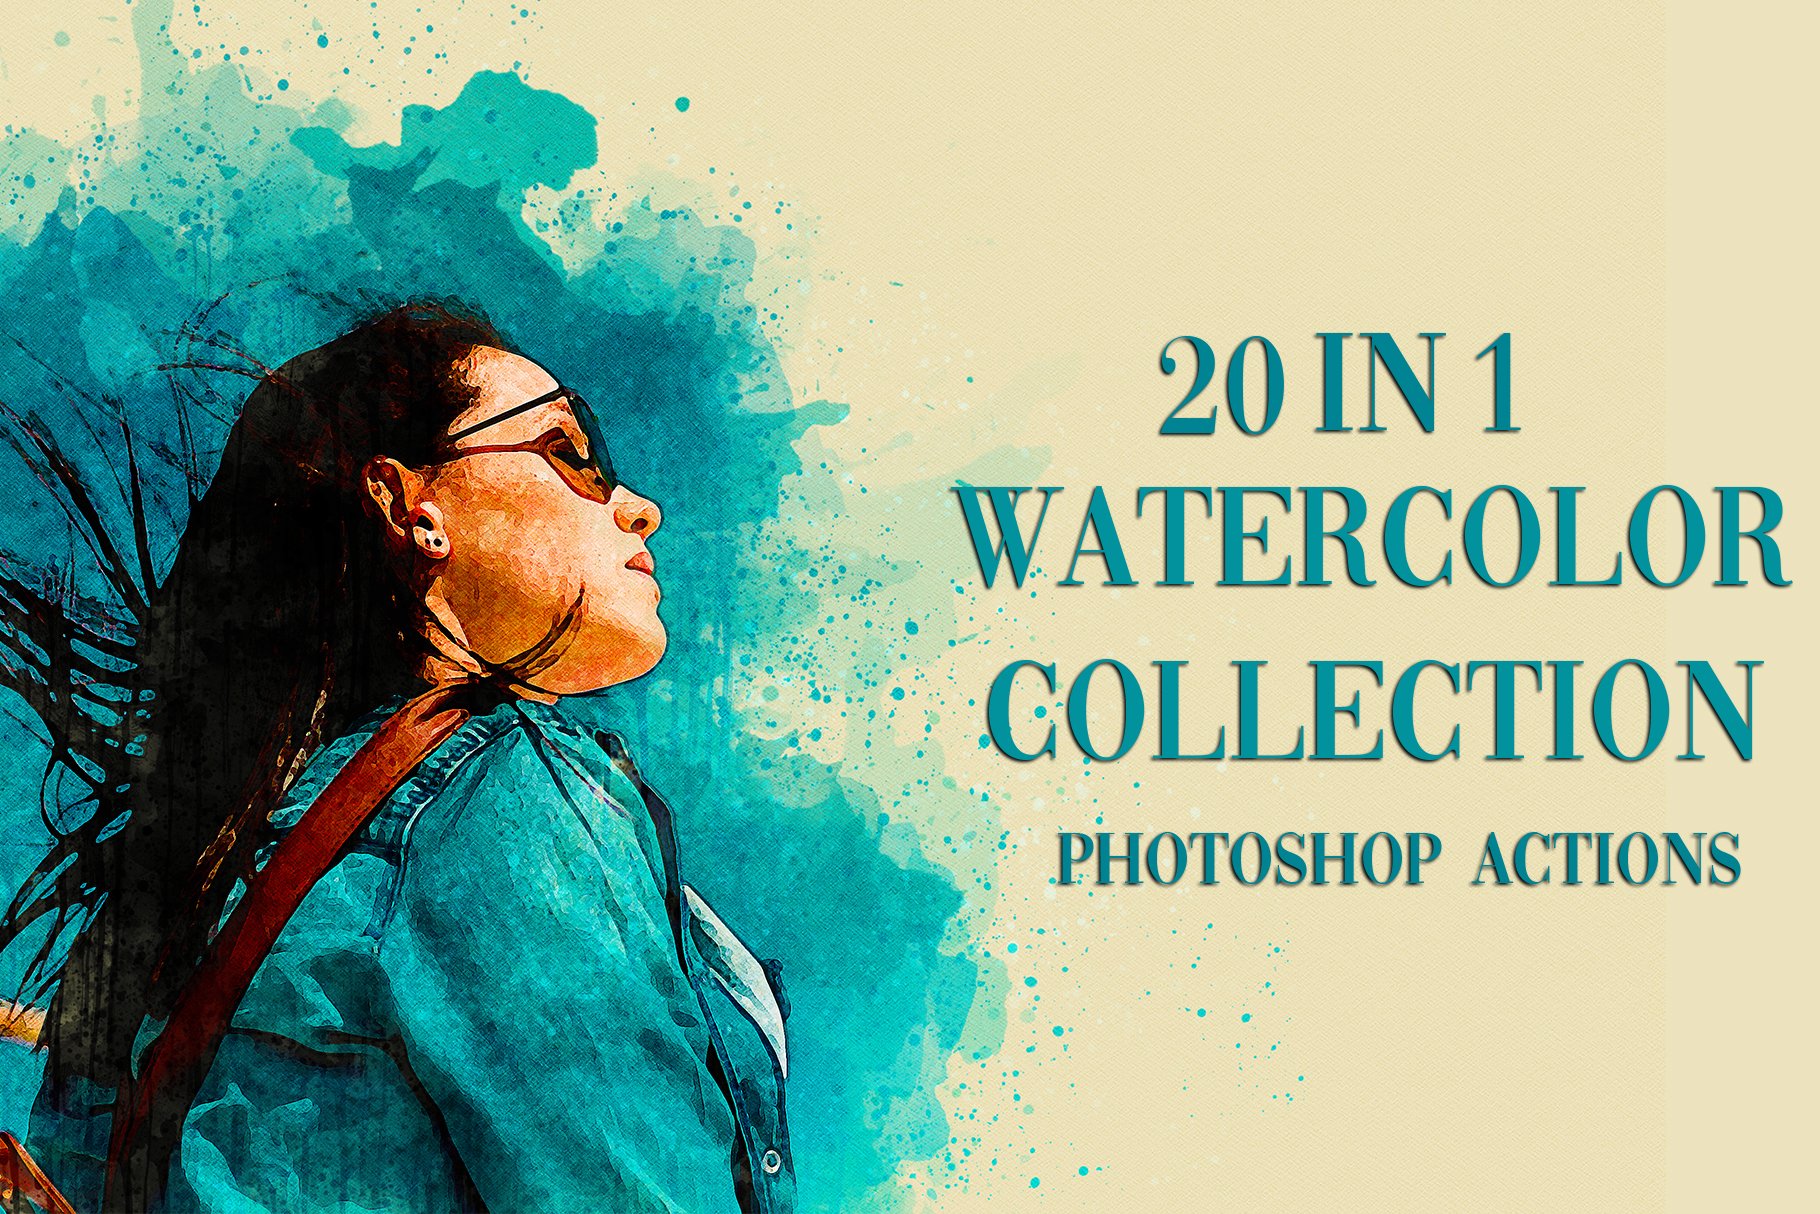 20 in 1 Watercolor Photoshop Actionscover image.